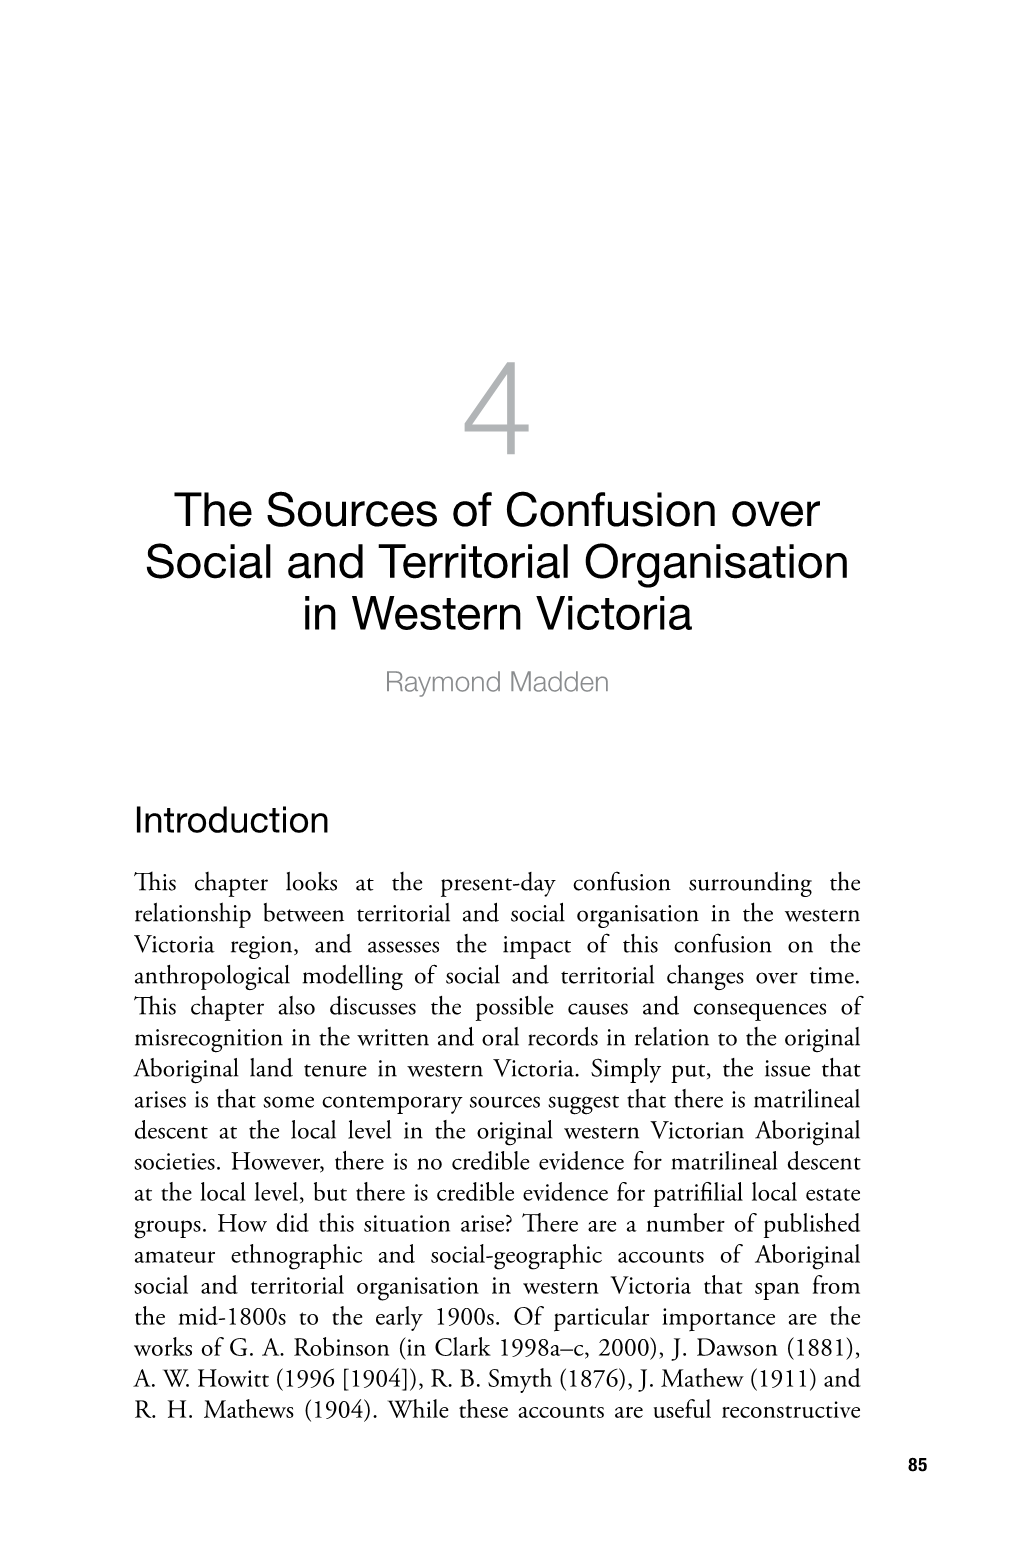 The Sources of Confusion Over Social and Territorial Organisation in Western Victoria Raymond Madden